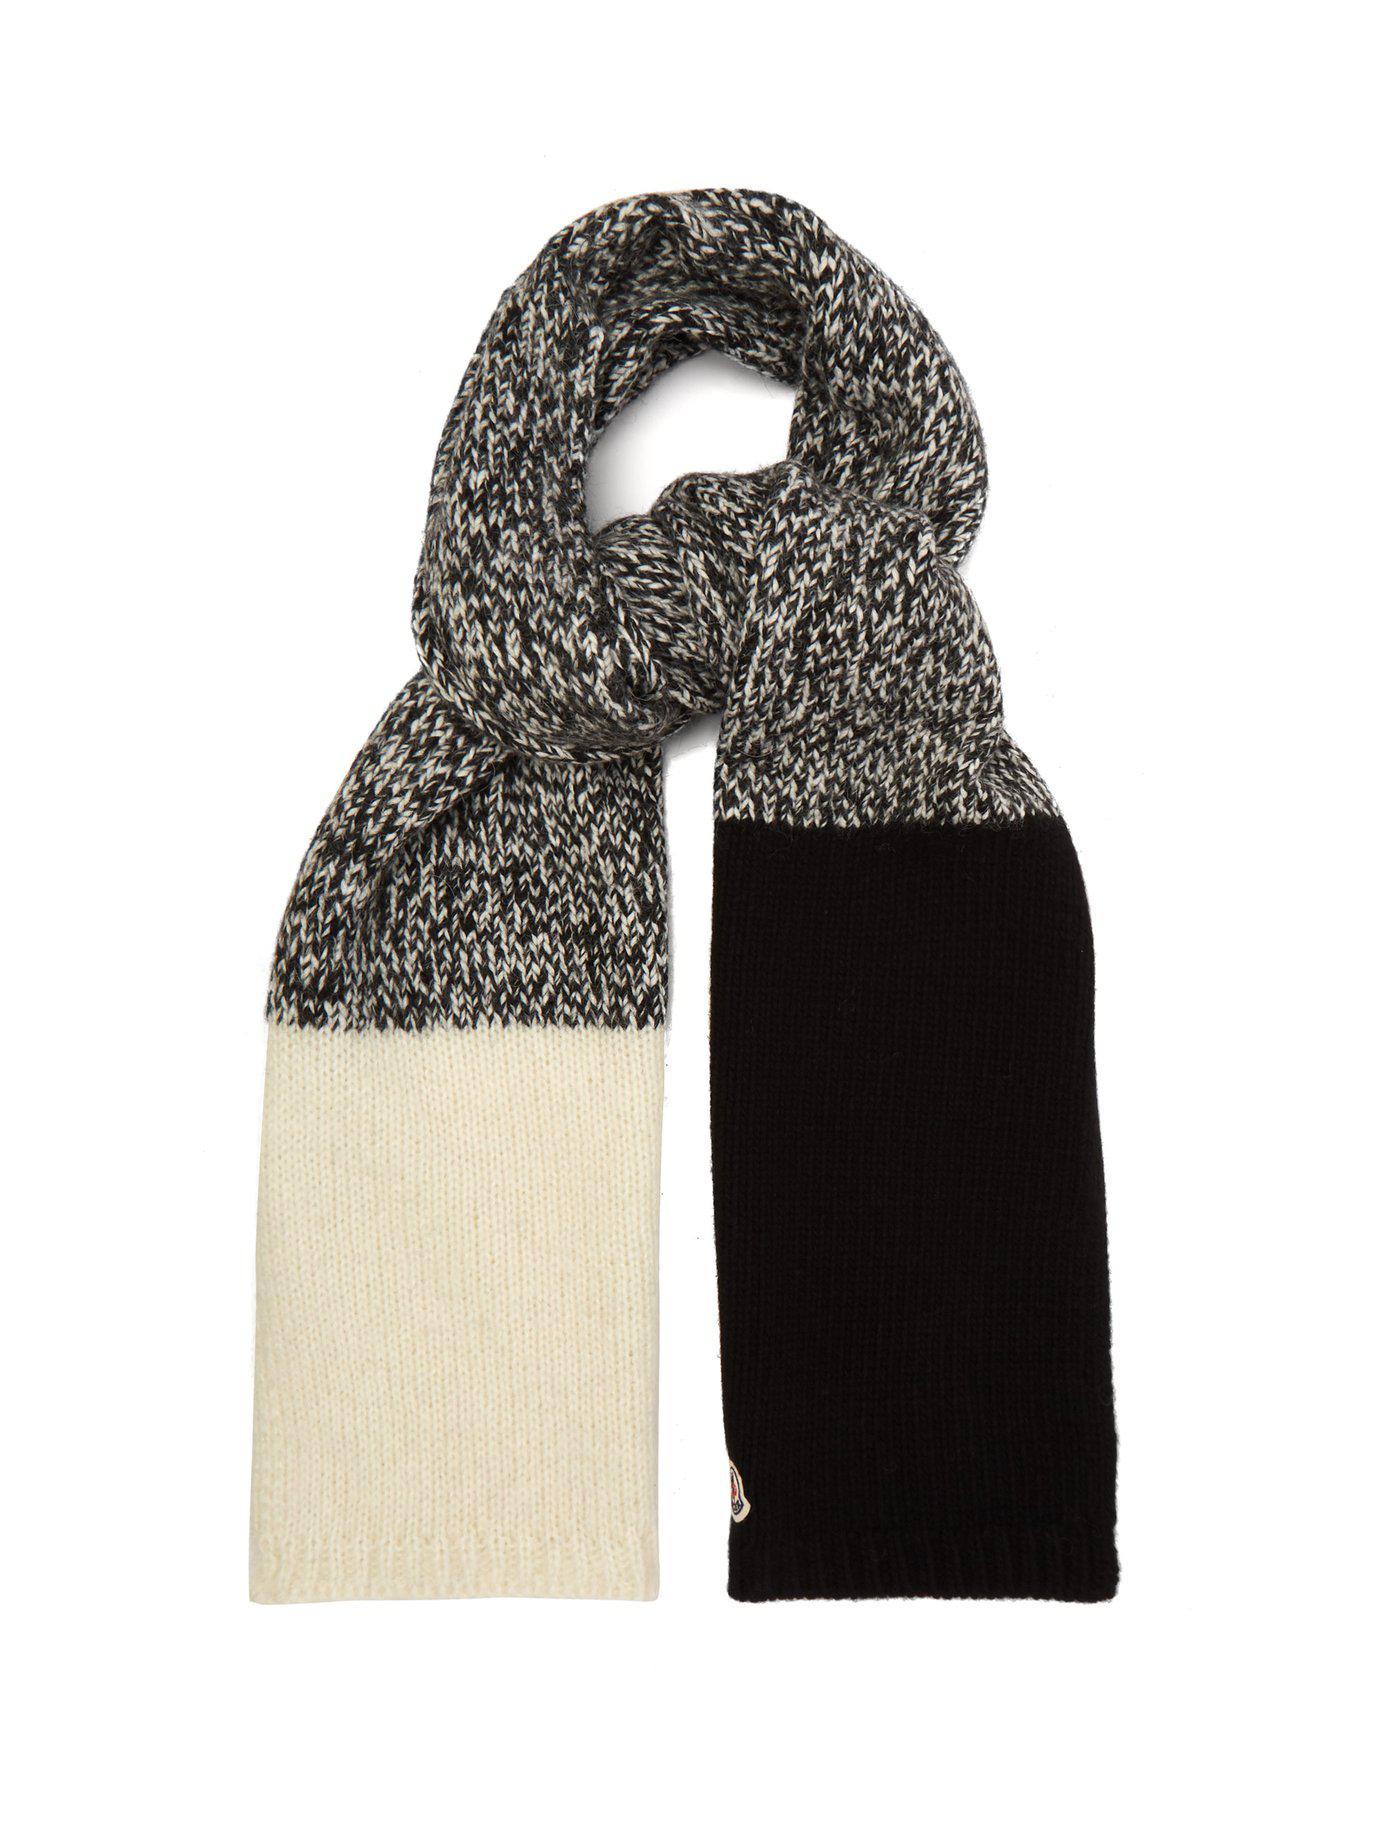 Moncler Denim Chunky Knit Scarf in Black - Lyst